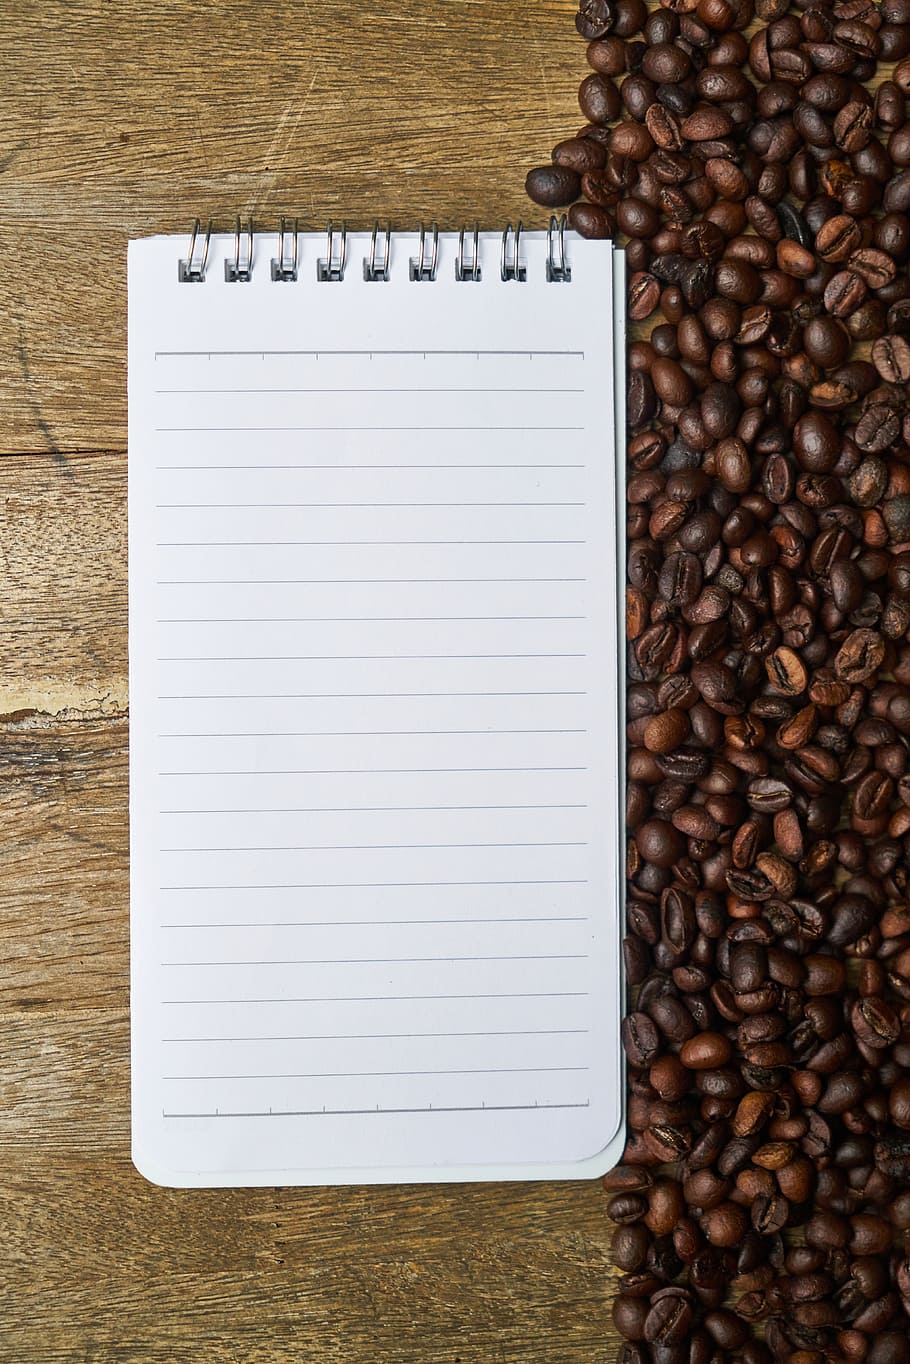 white, ruled, paper, coffee beans, coffee, core, background, food, photography, wood